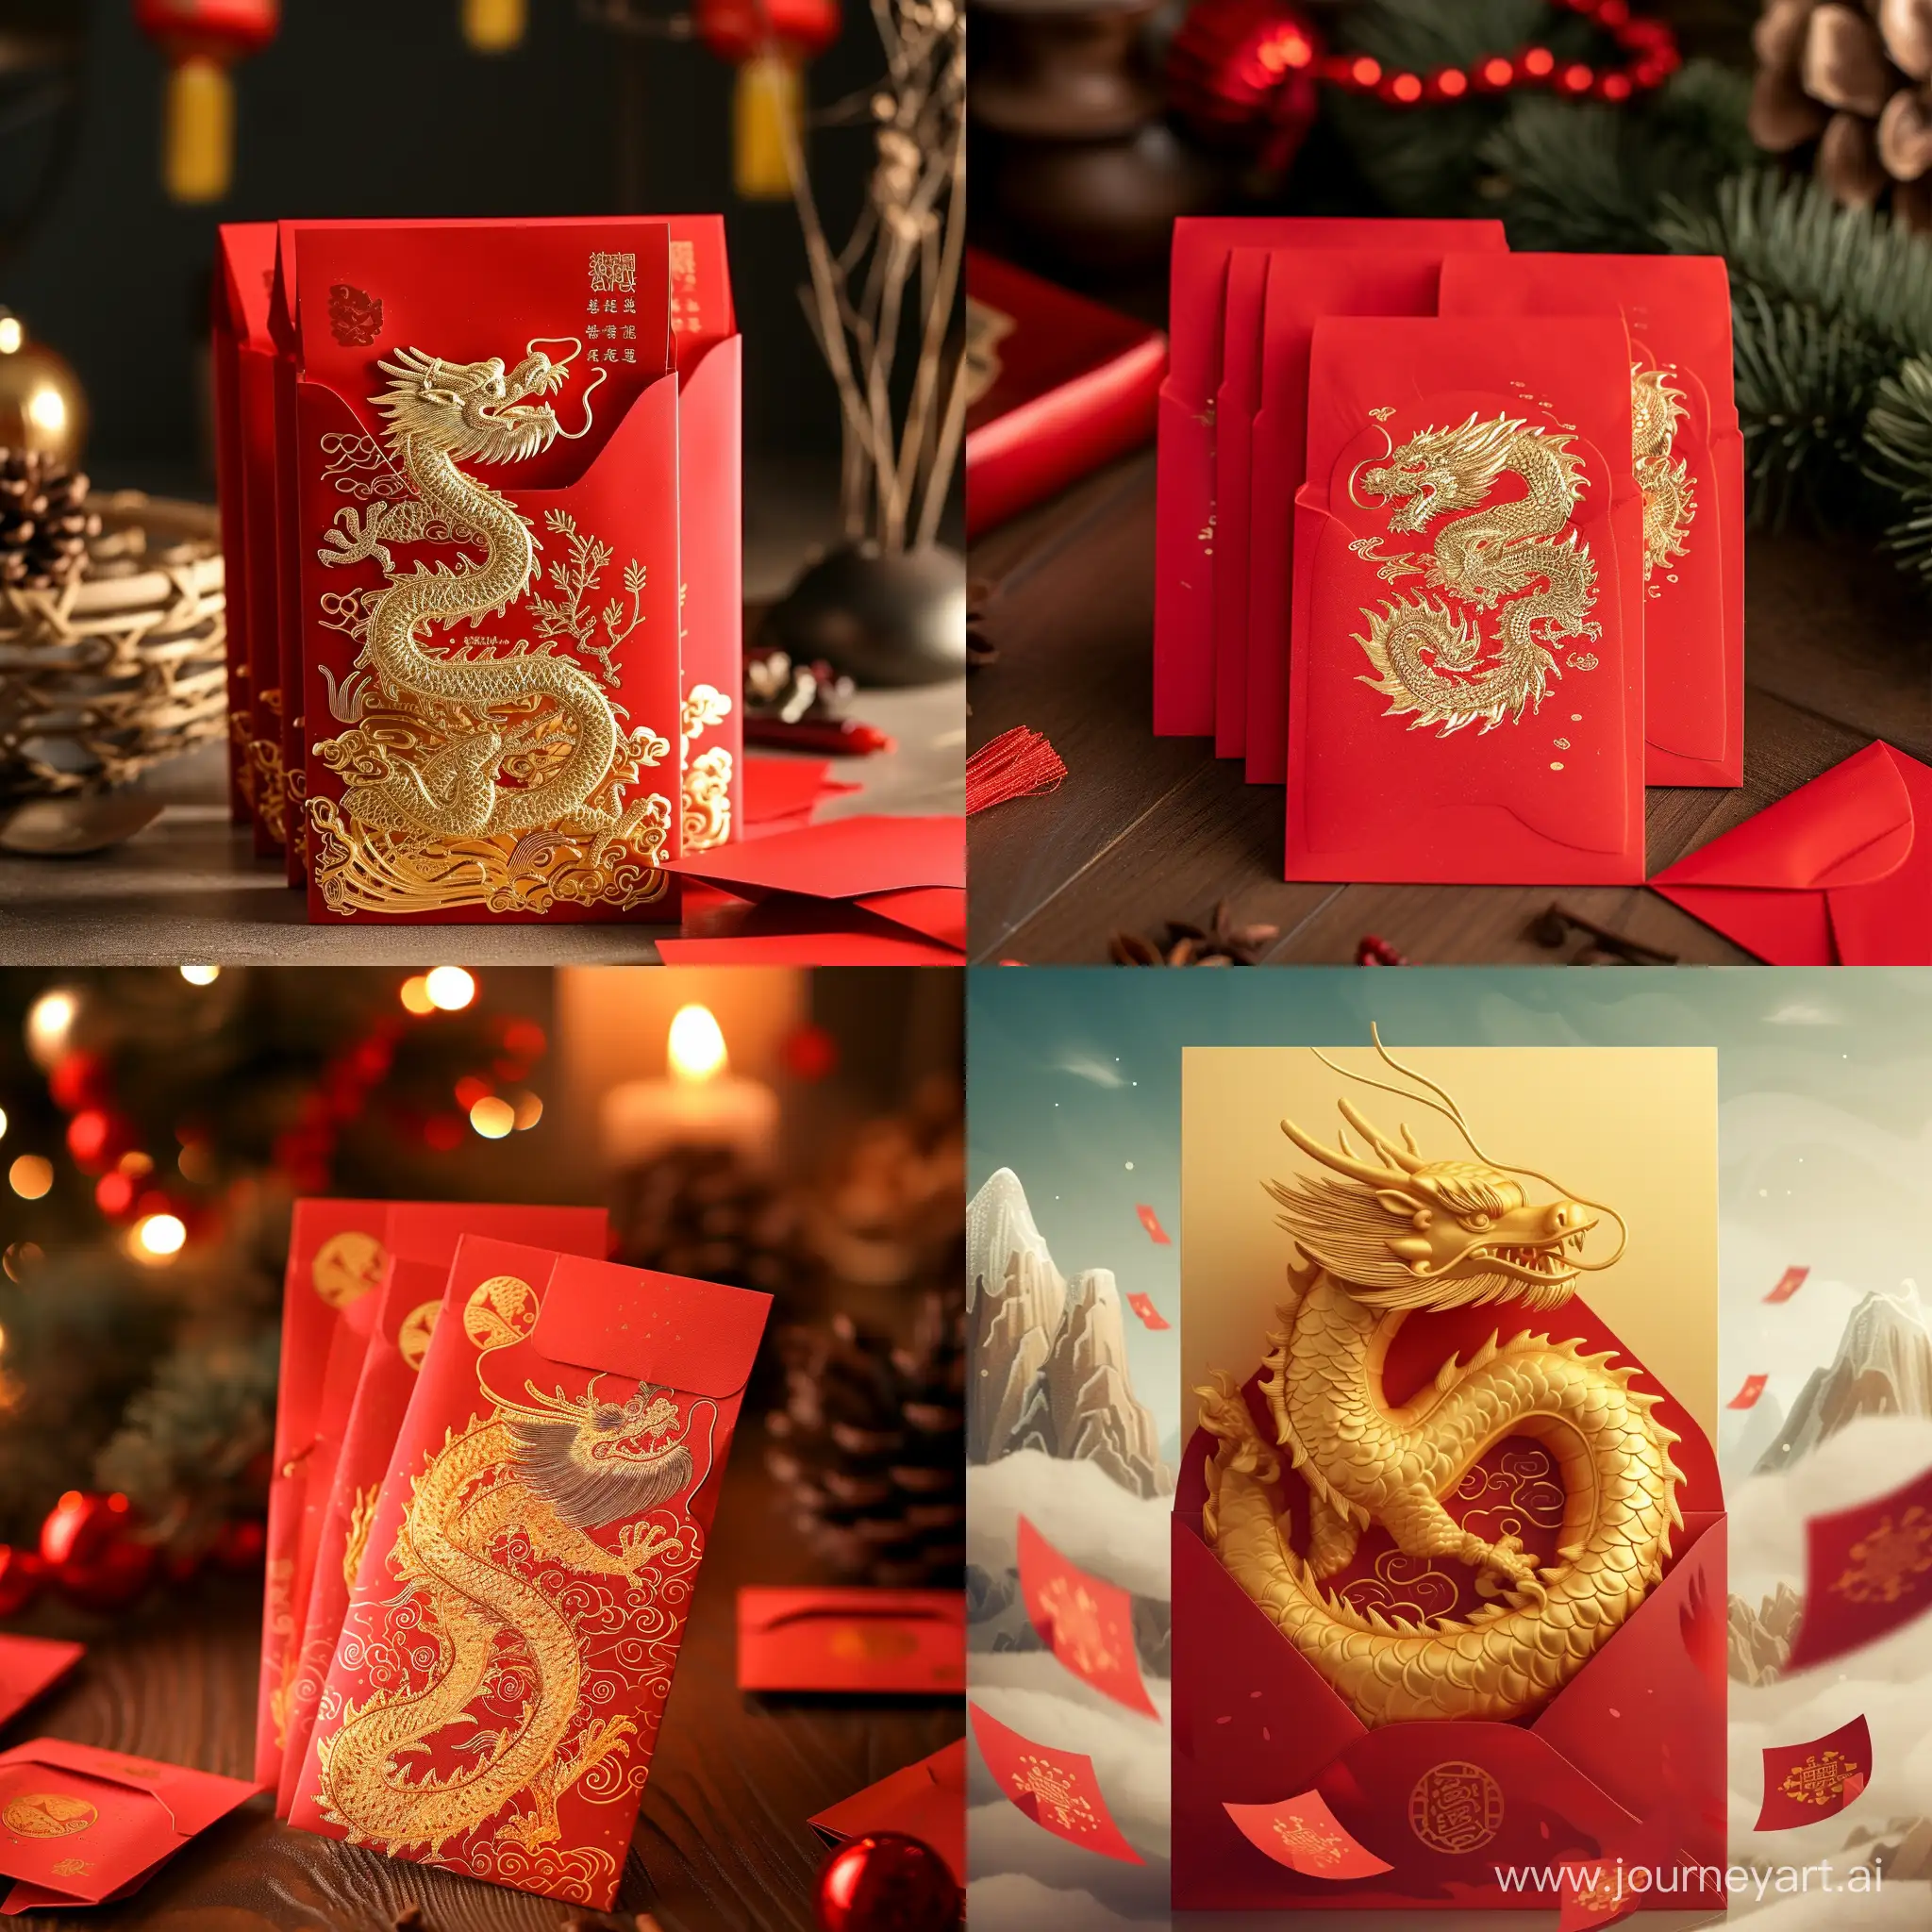 Golden-Dragon-and-New-Year-Red-Envelopes-in-the-Cold-Ocean-Celebration